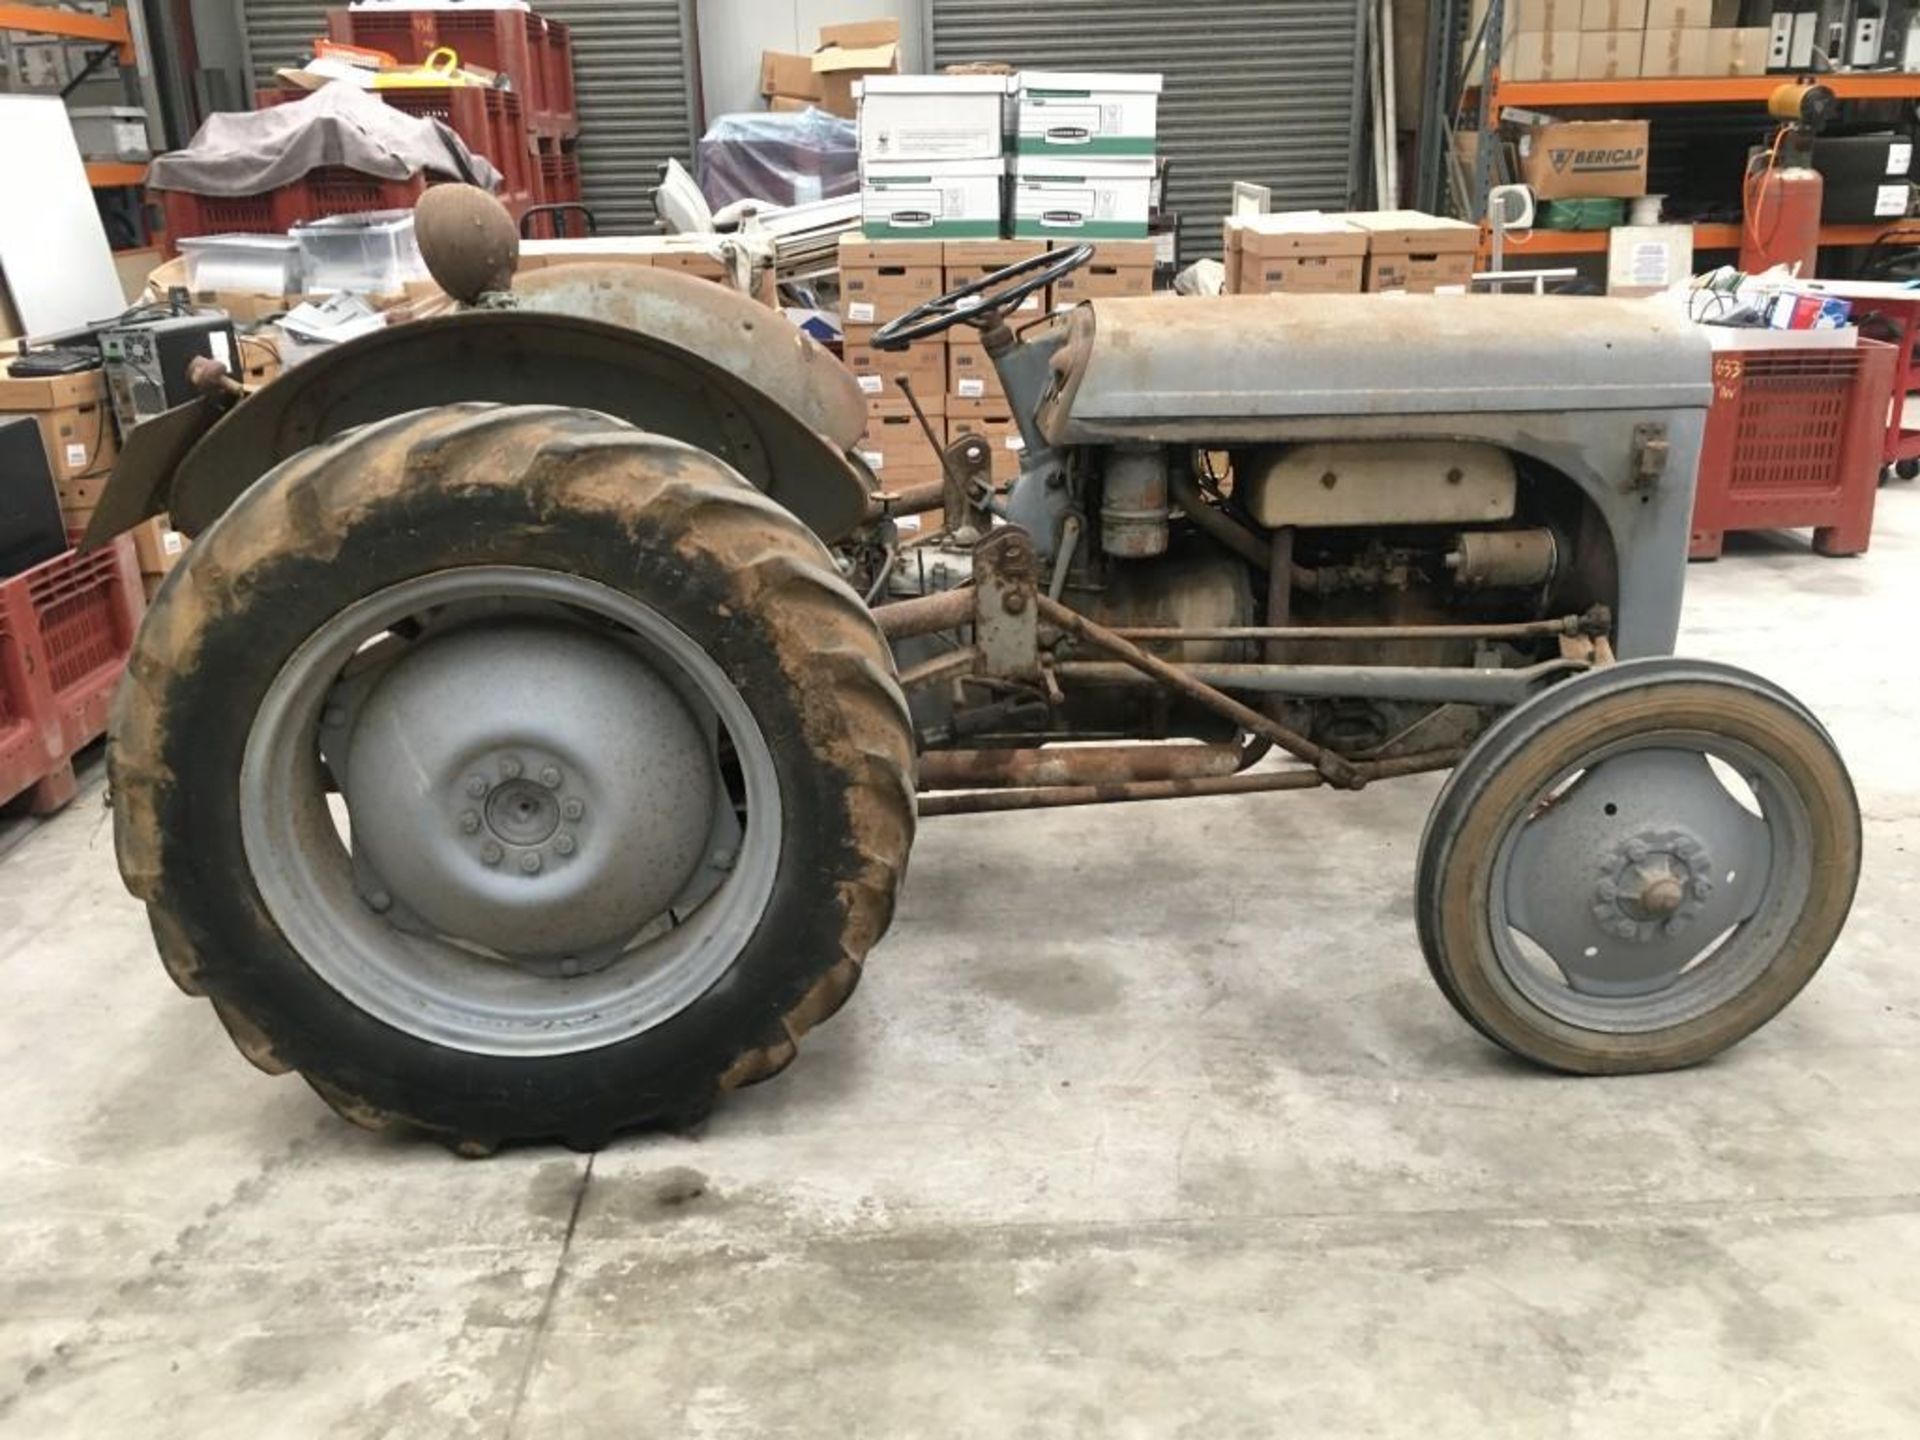 Ferguson TE-20, Petrol Parrafin, c/w Hydraulic Front Loader & Dung Fork (next to auctioneers box), N - Image 11 of 15